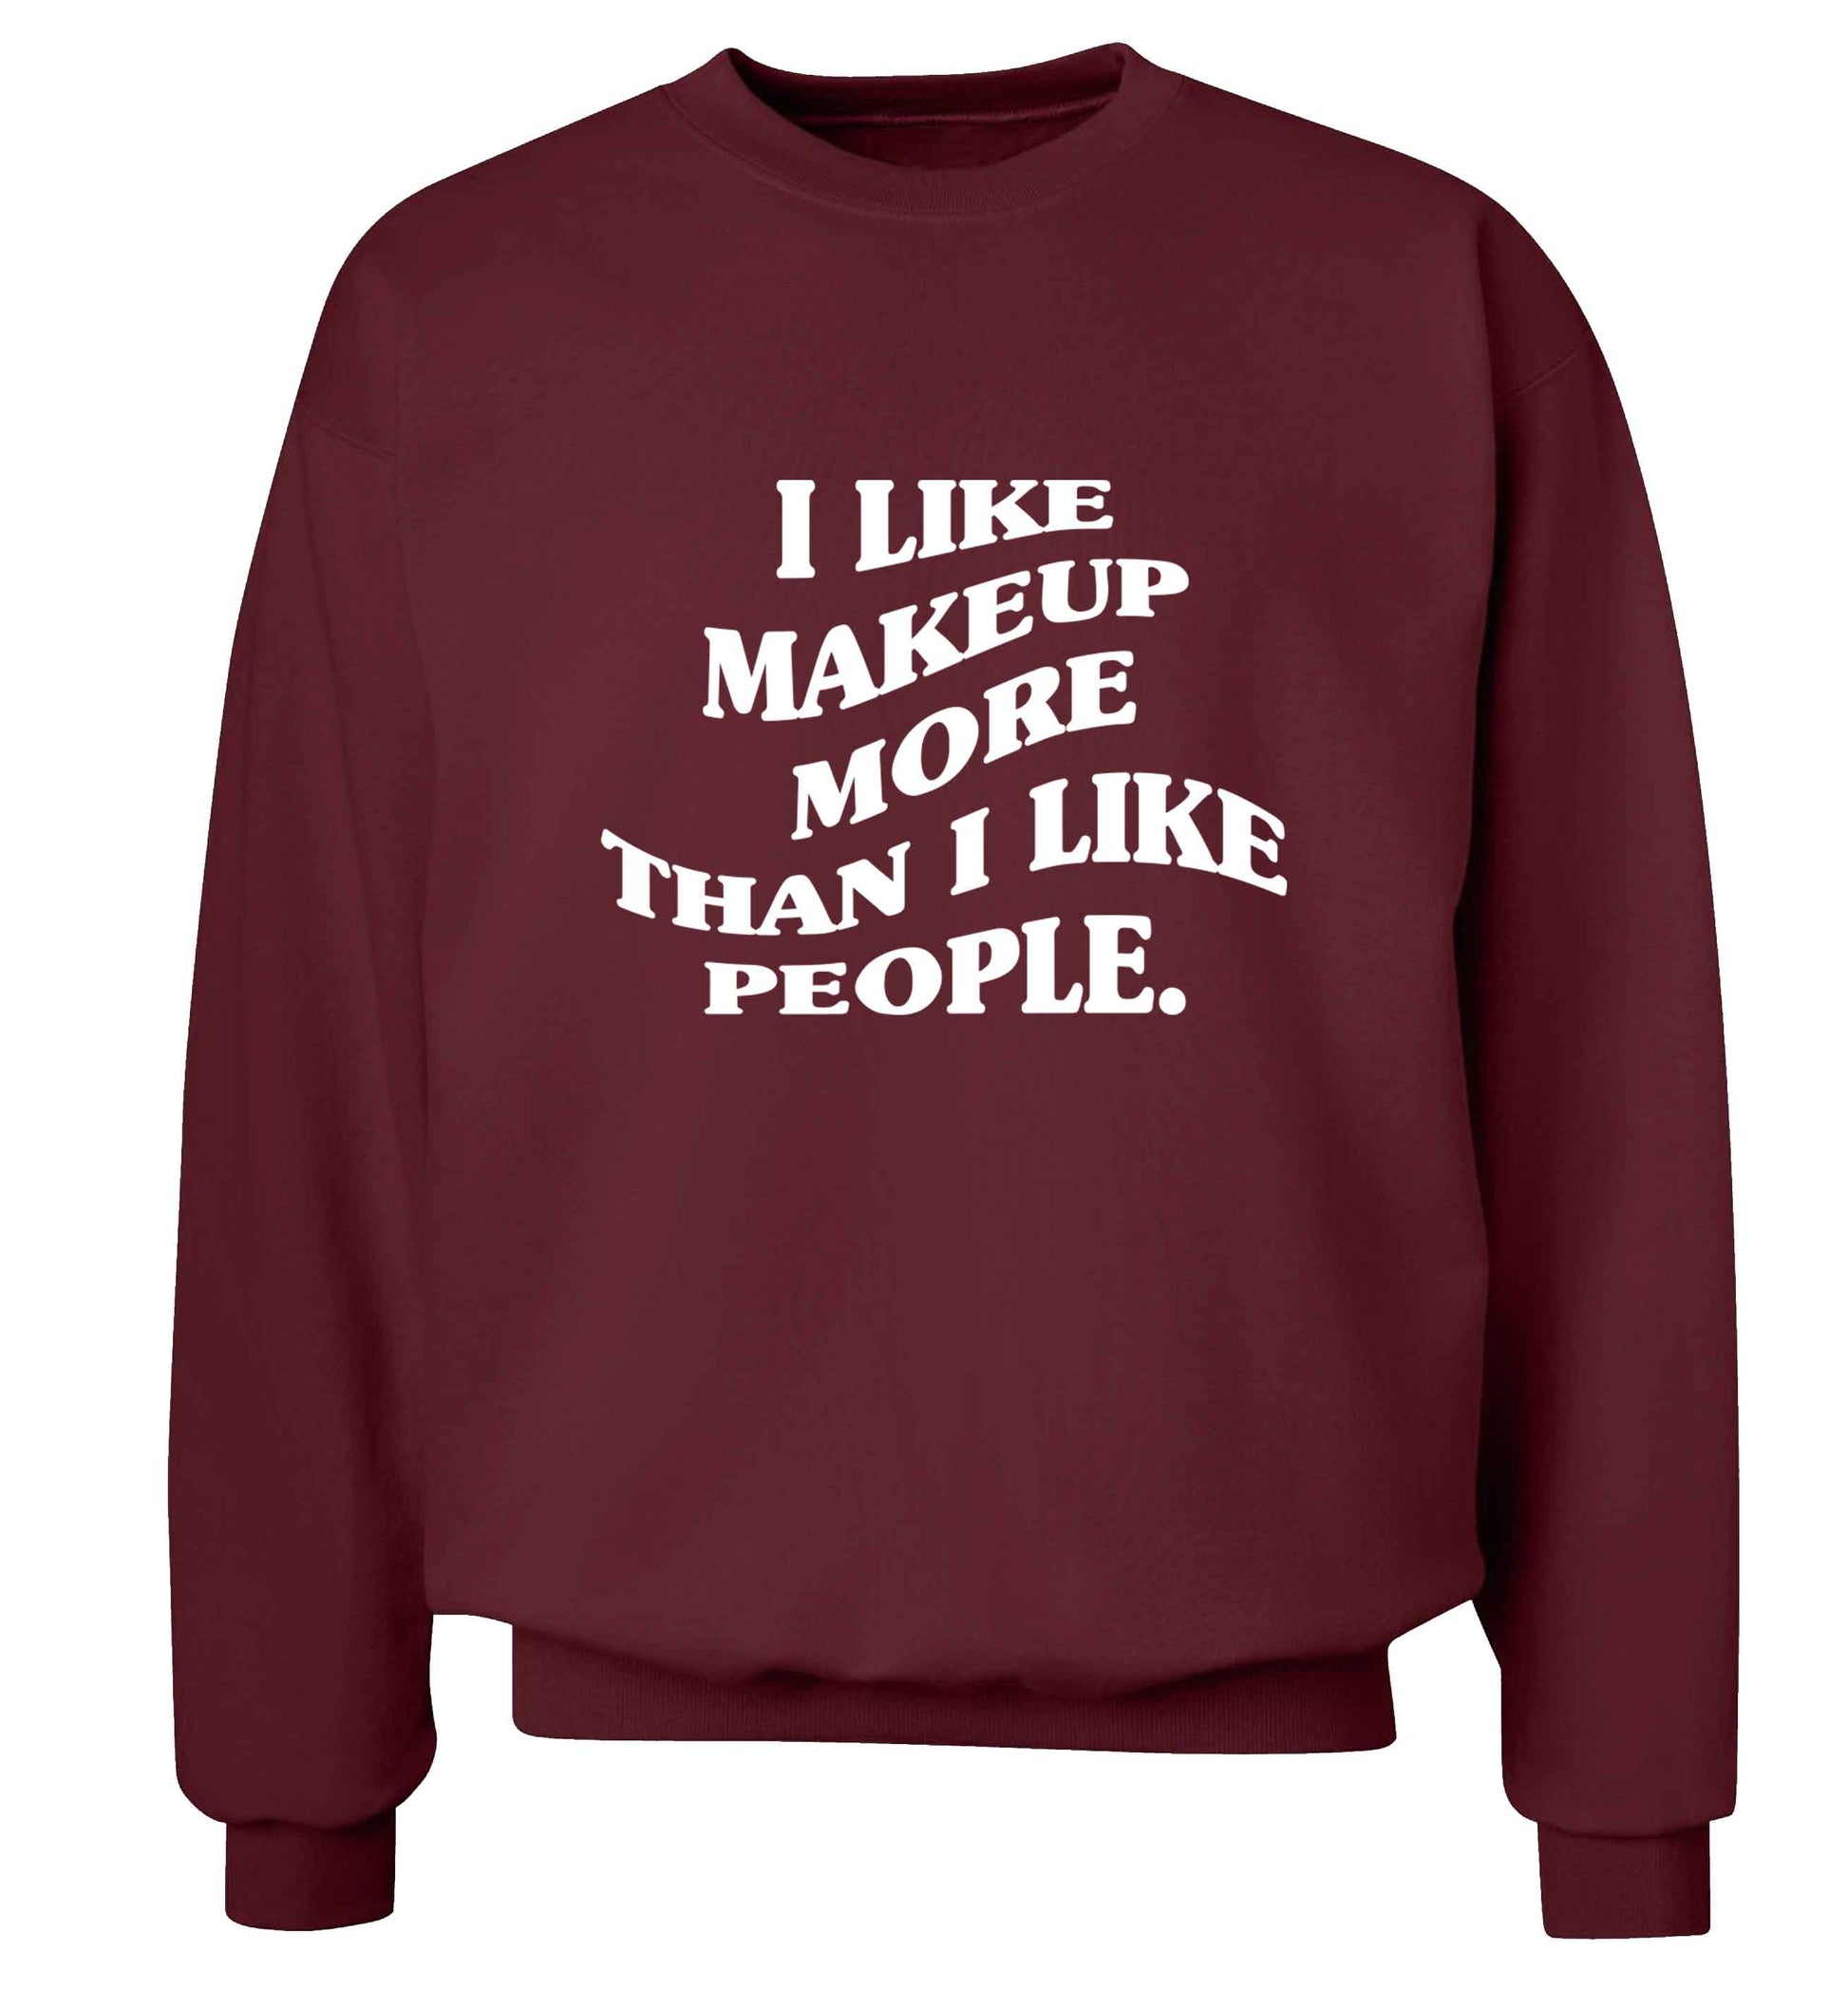 I like makeup more than people adult's unisex maroon sweater 2XL